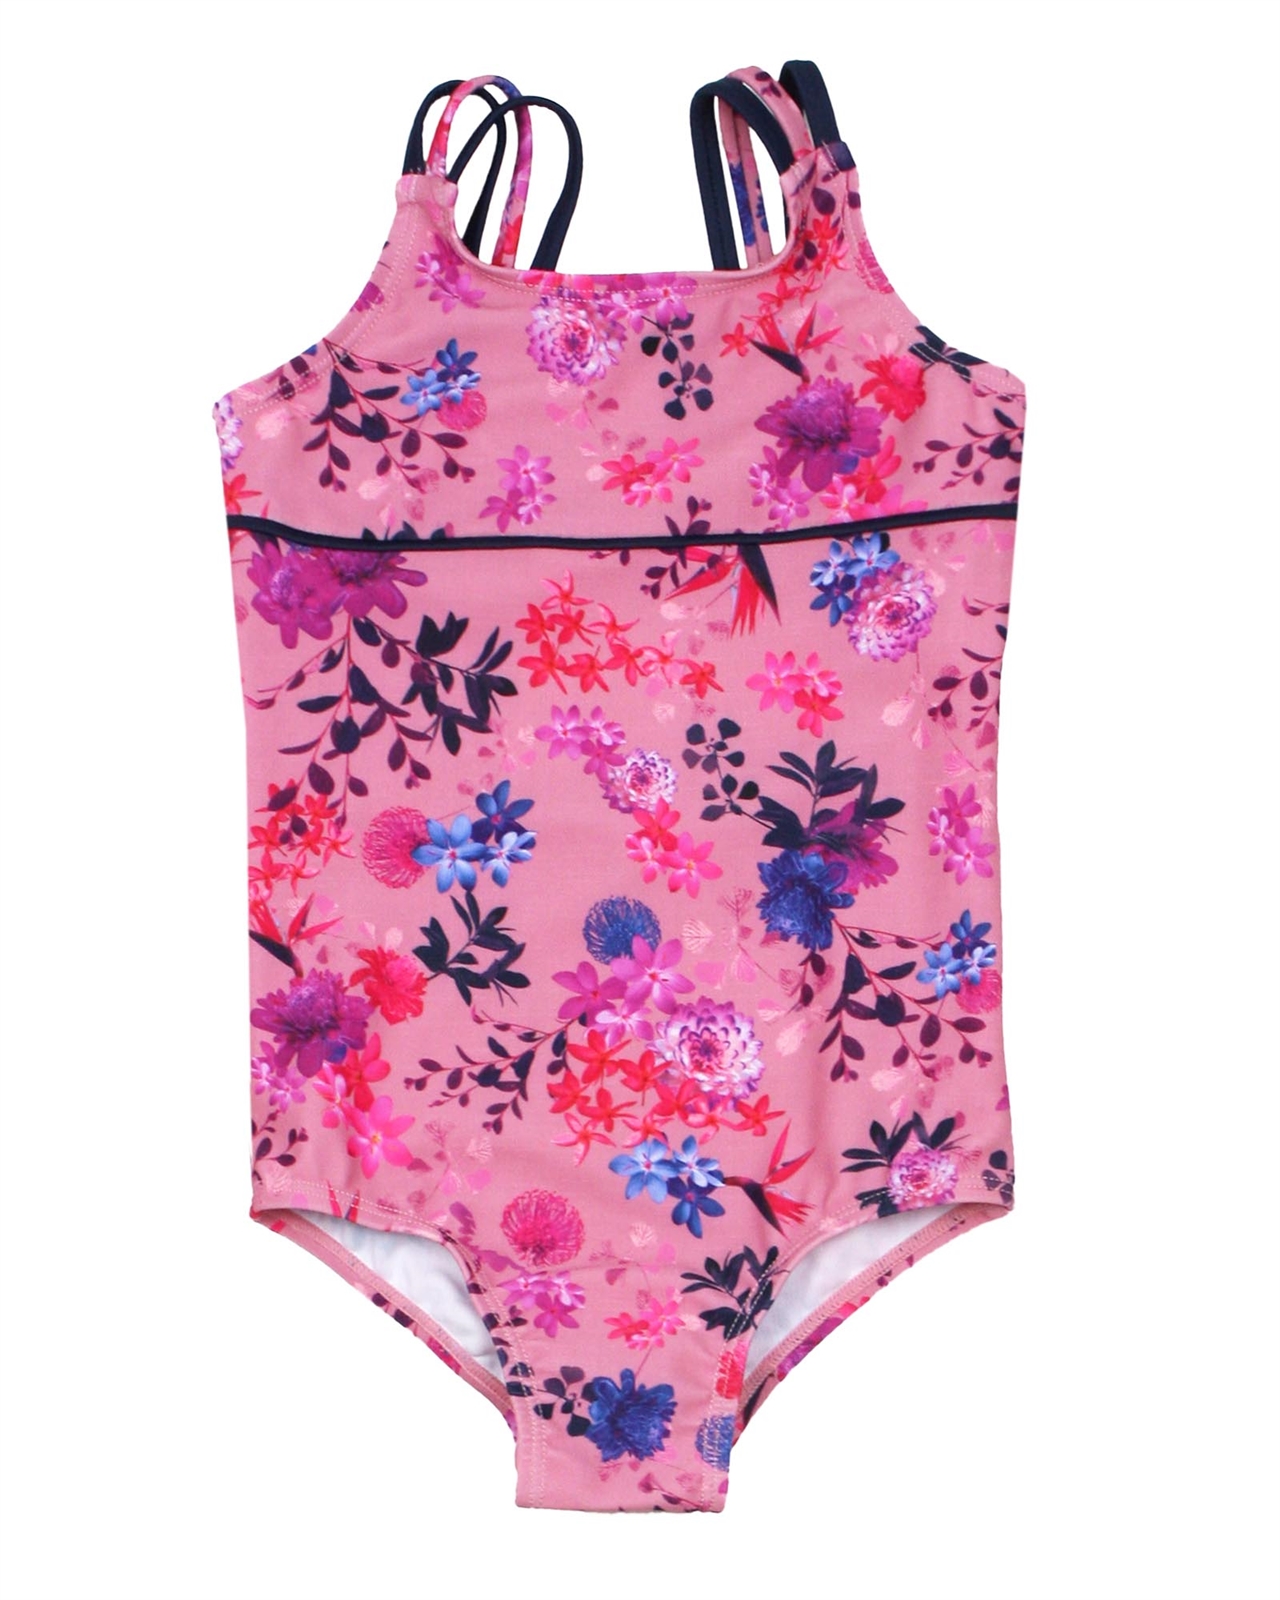 Nano Girls One-piece Swimsuit in Floral Print - Nano Spring/Summer 2021 ...